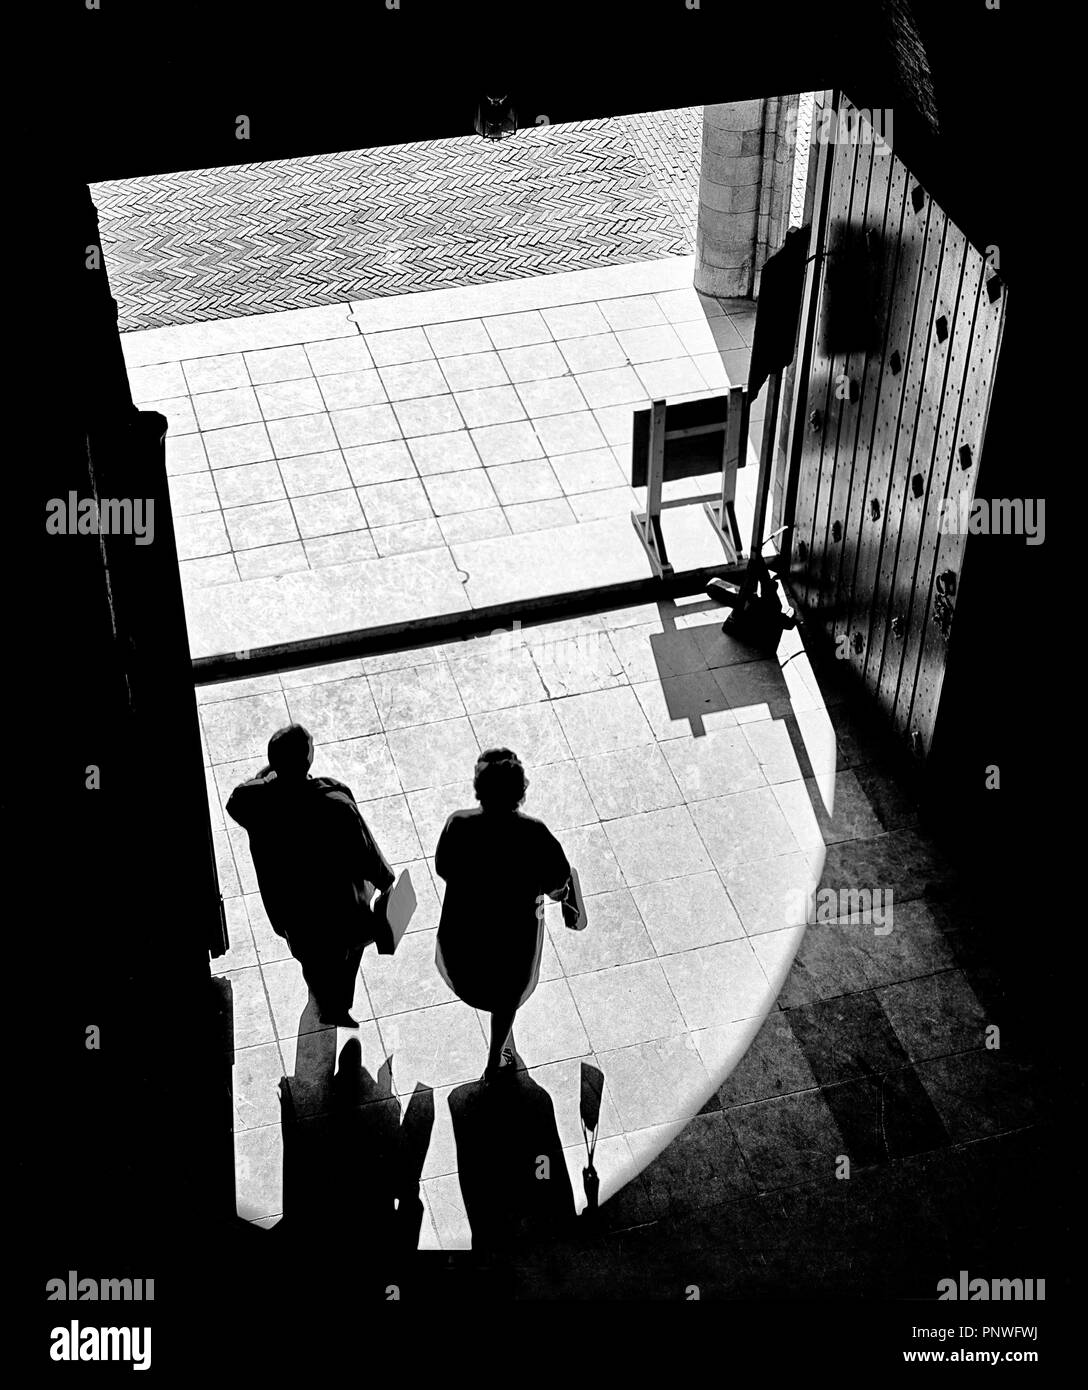 Two people stepping out of a dark building into sun shines Stock Photo